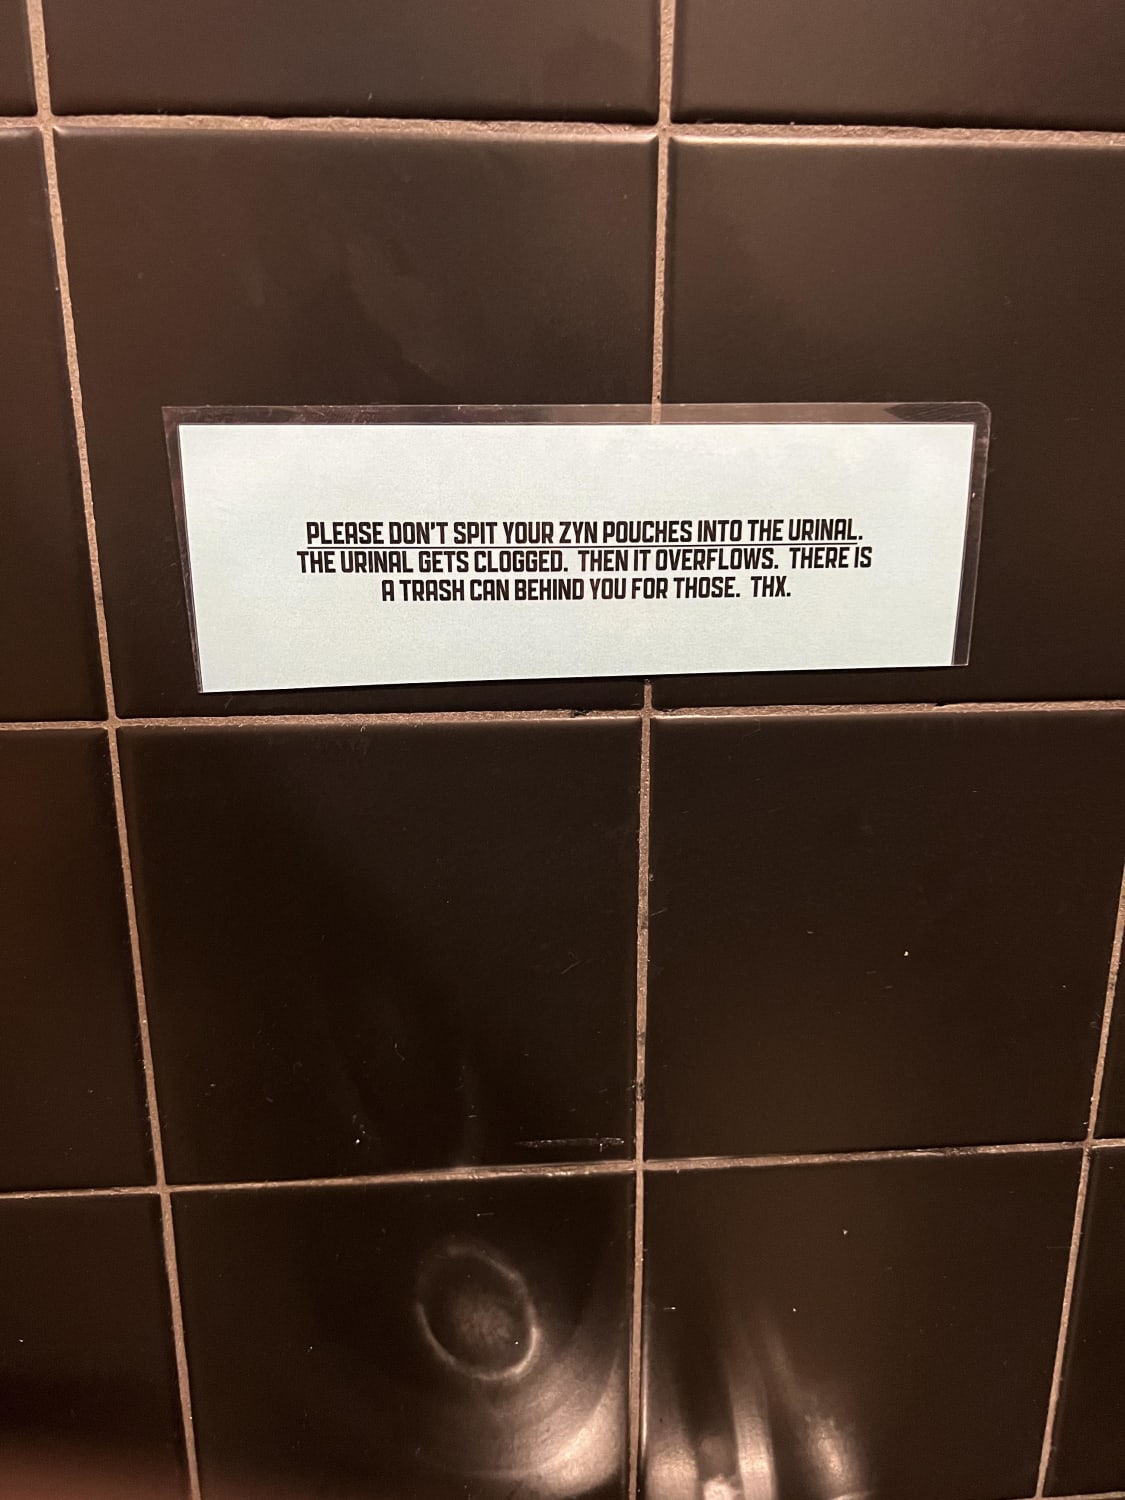 At the urinal in a brewery